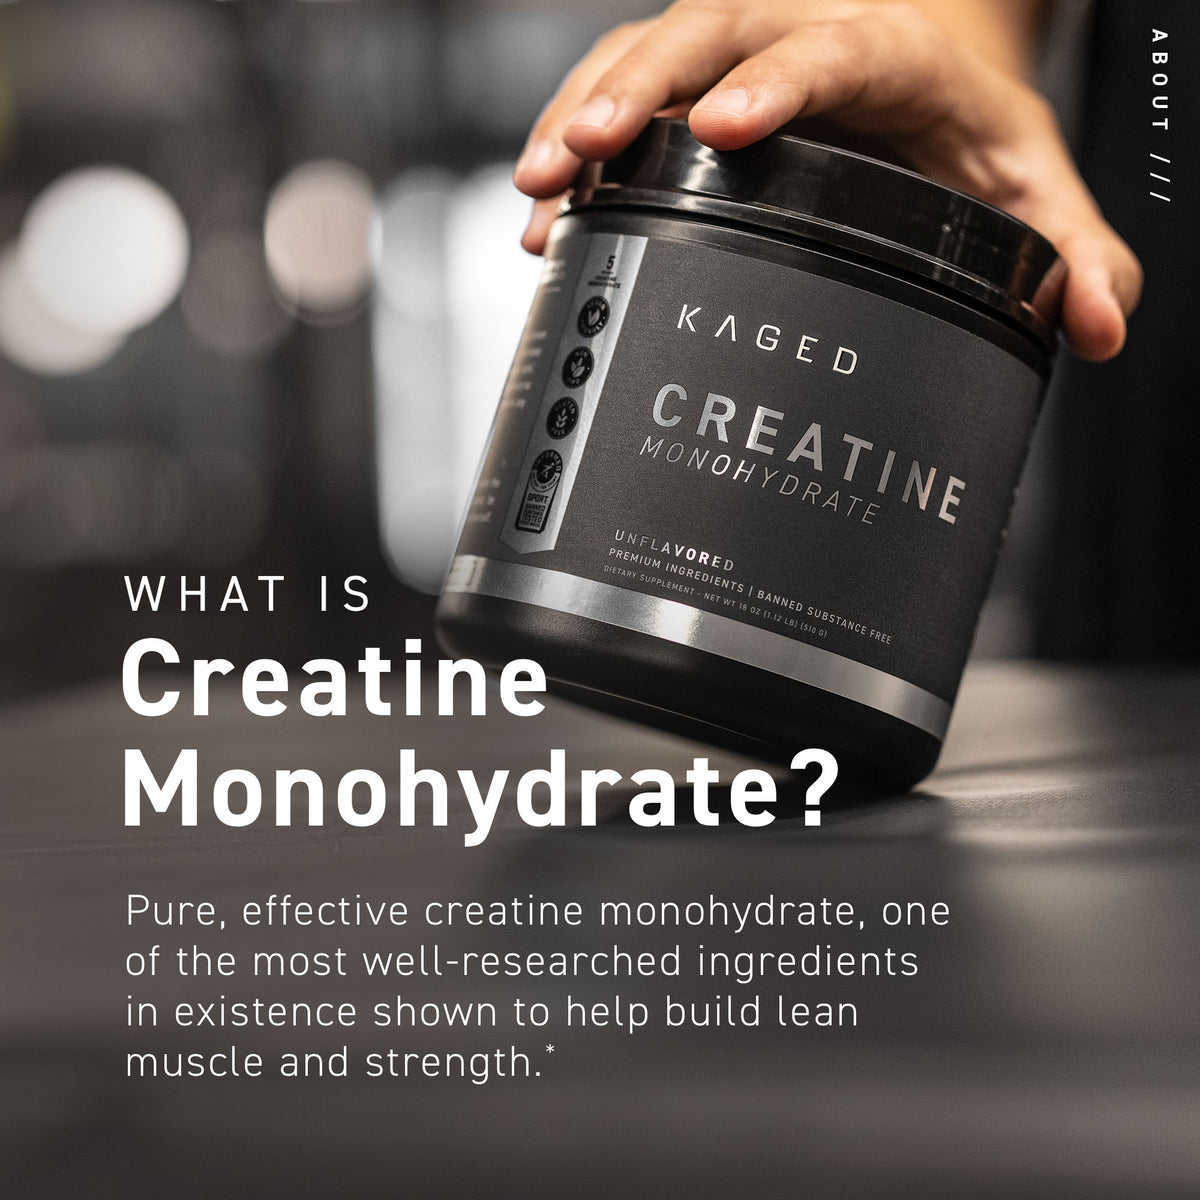 Micronized Creatine Monohydrate Powder - 100% Pure Unflavored Creatine Powder 5000mg per Serv (5G) Amino Acid Supplement Supports Muscle Building 